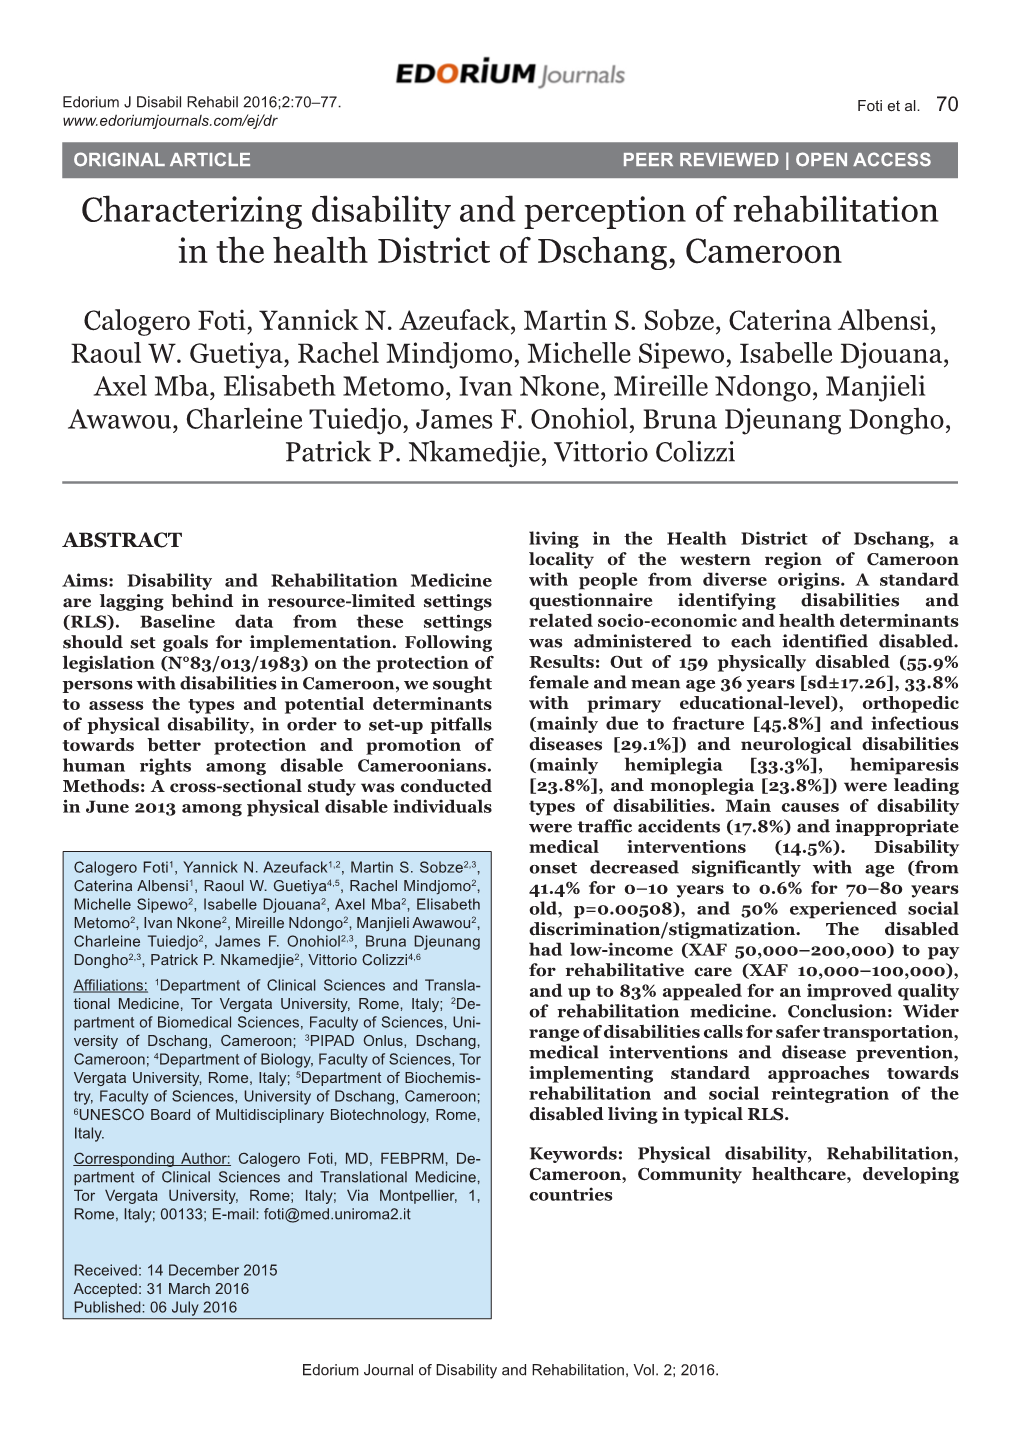 Characterizing Disability and Perception of Rehabilitation in the Health District of Dschang, Cameroon